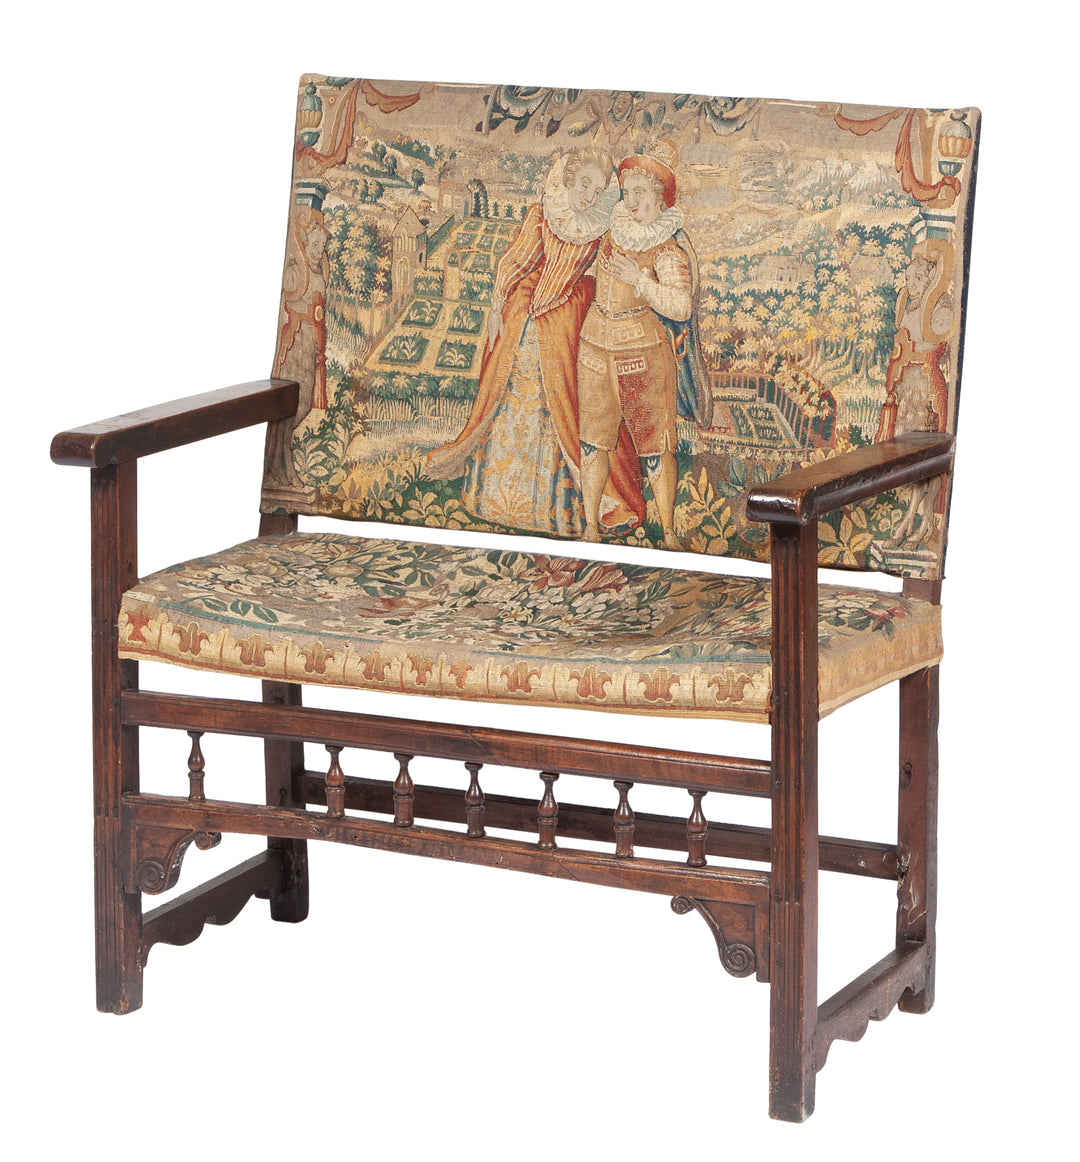 Italian Walnut and Tapestry-Upholstered Bench